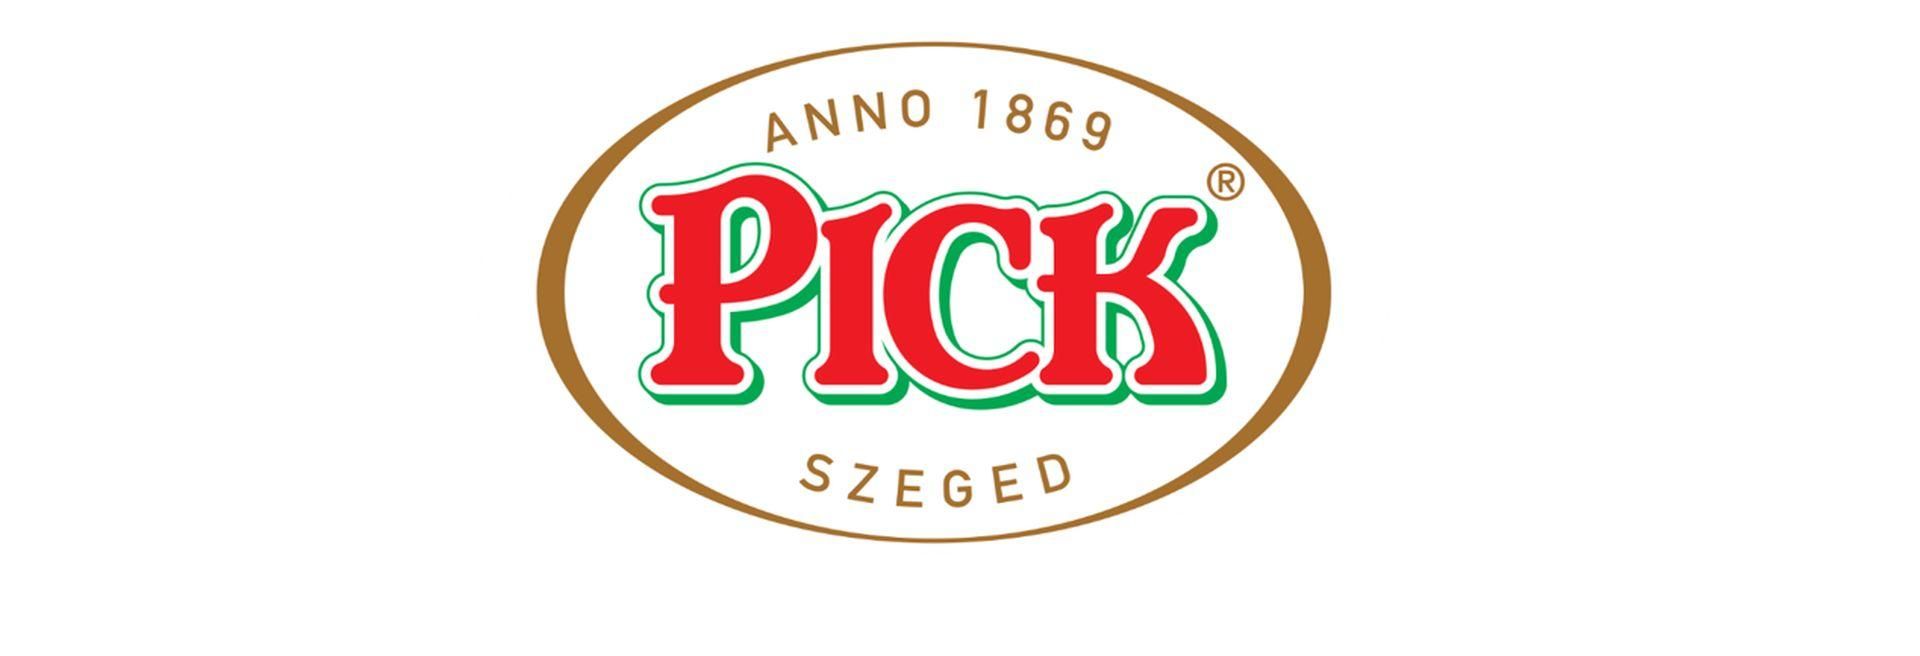 Pick is building a new salami factory in Szeged